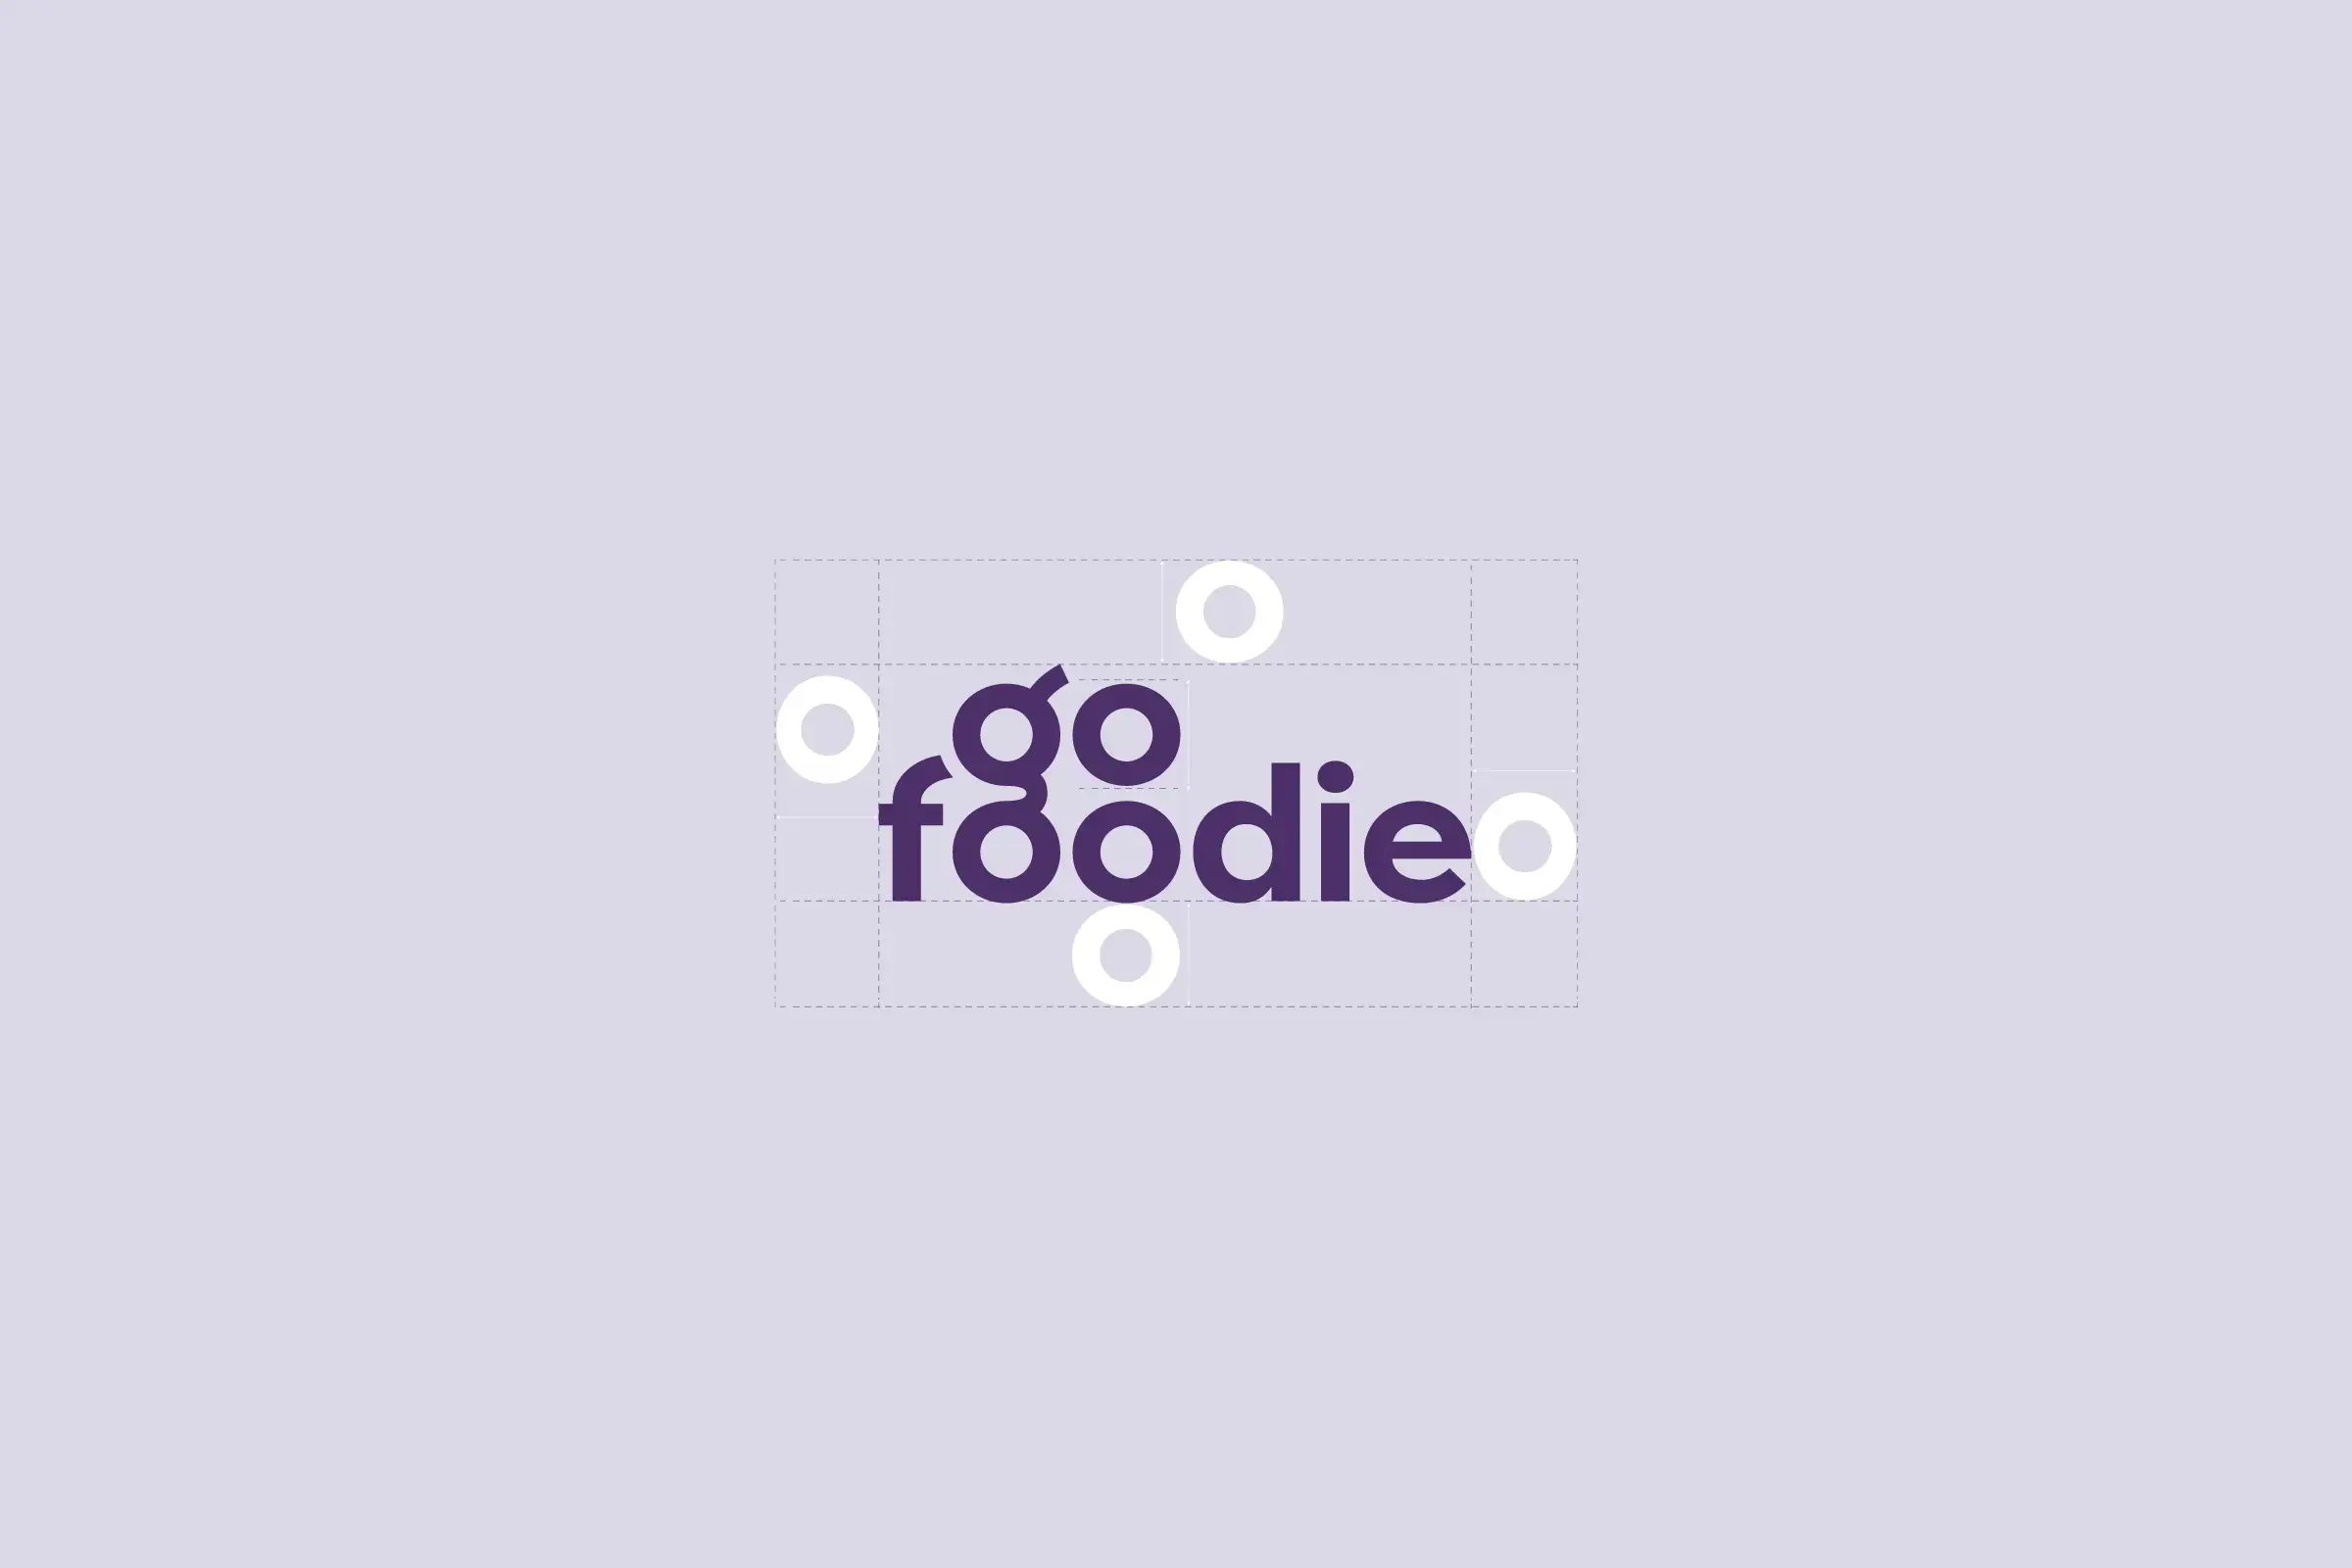 GoFoodie brand identity visuals by Ten Fathoms